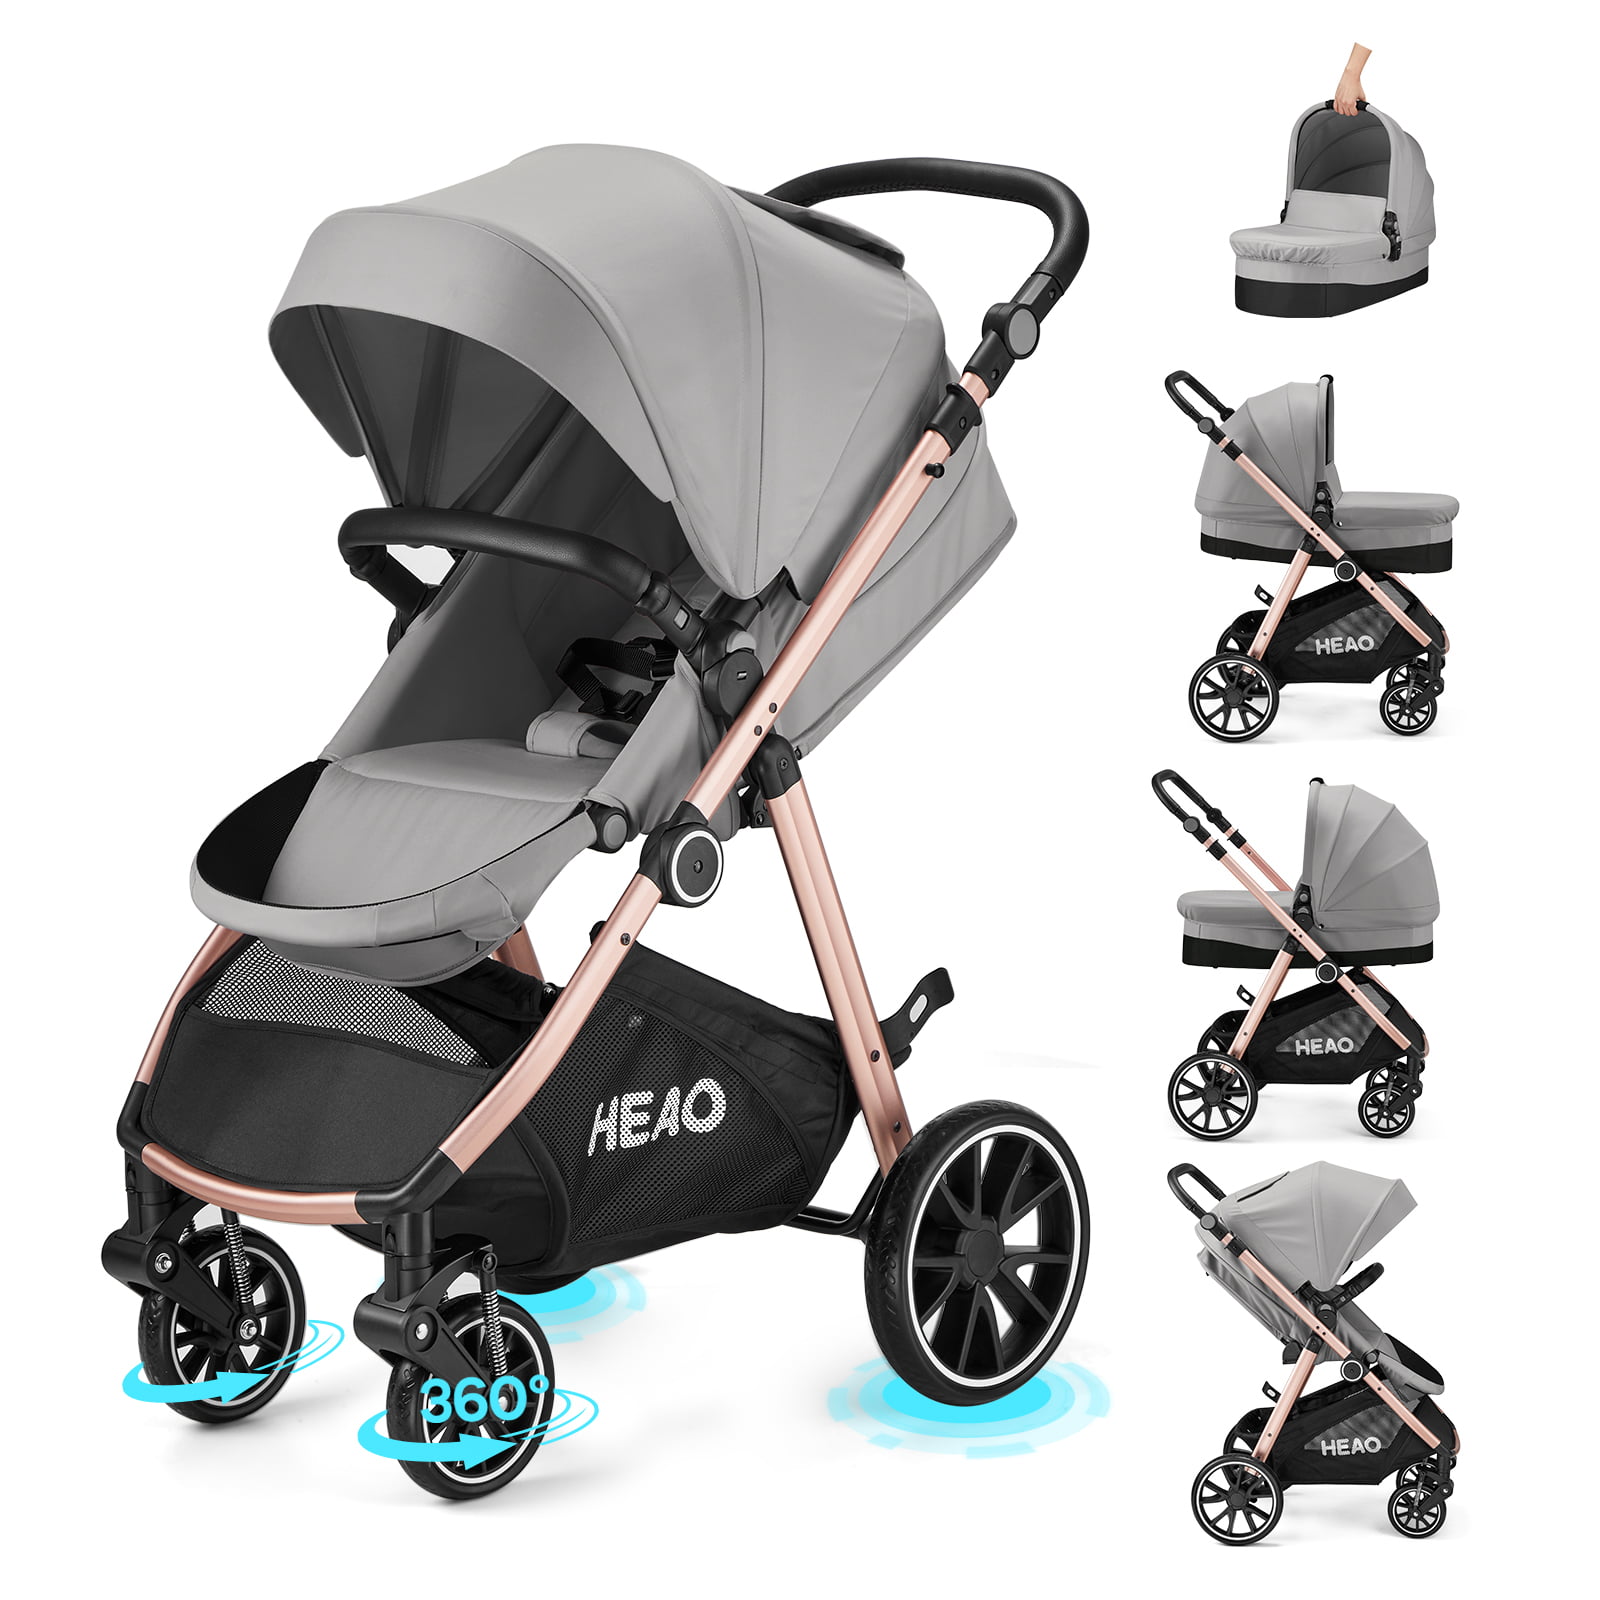 Black 3 in 1 Baby Stroller 3 in 1 Tricycle Baby Walker High Landscape Stroller Folding Strollers Baby Trolley Baby Pram for Baby 0-36 Months